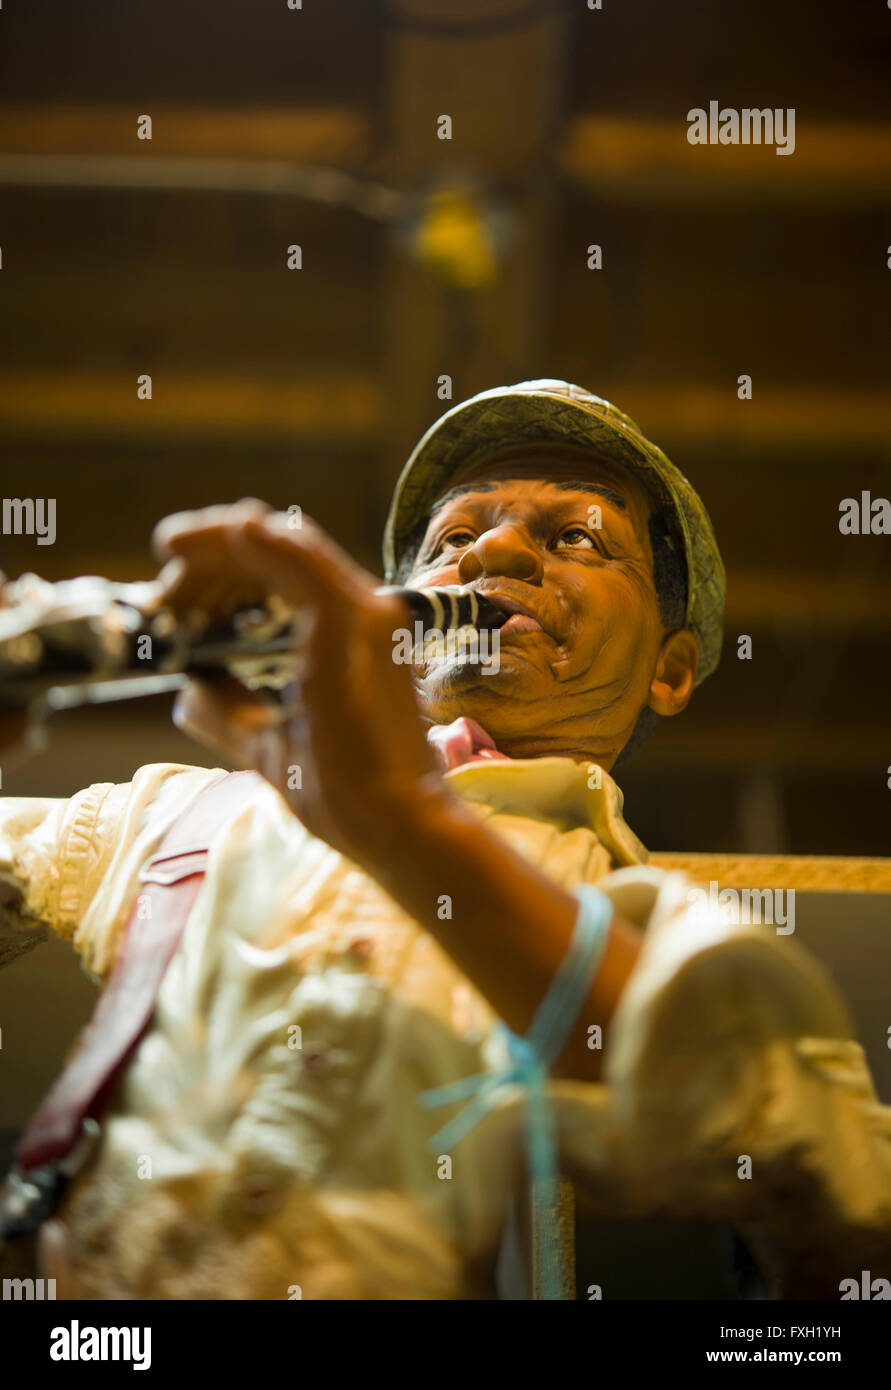 Jazz Musician Statuette In An Antique Store Display Stock Photo Alamy